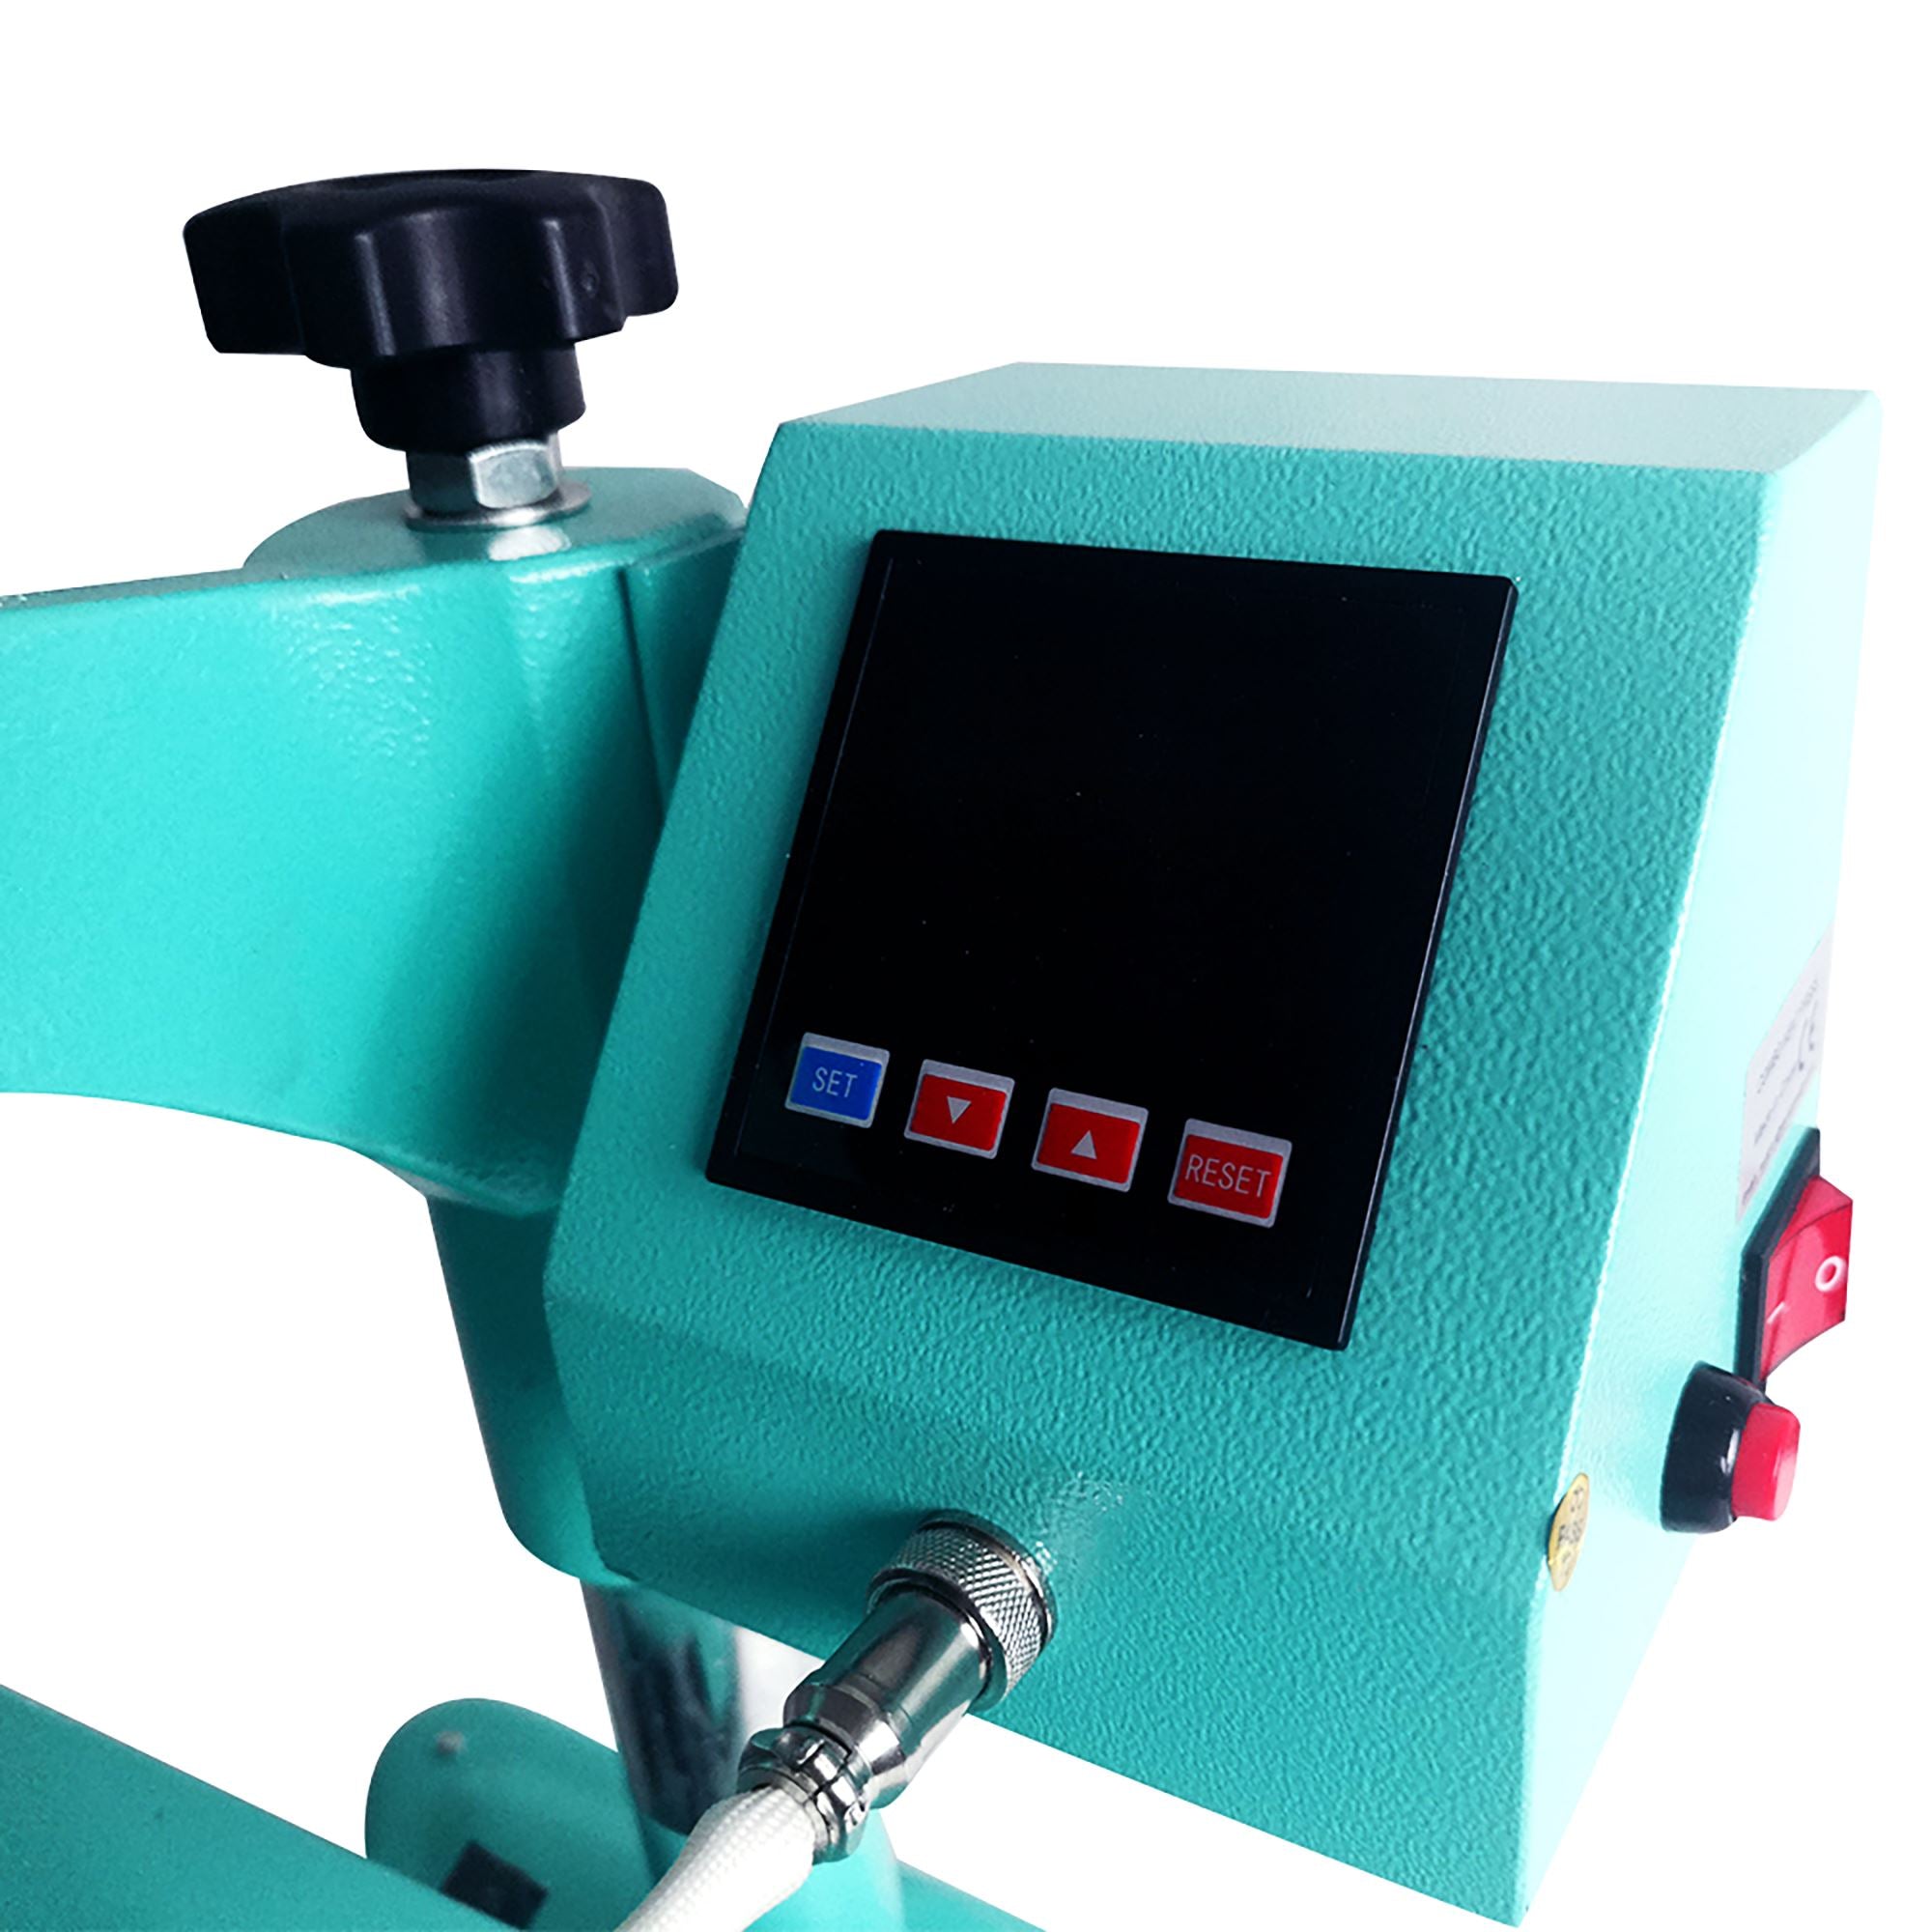 Swing Design 15 x 15 Pro Slide Out Heat Press - Turquoise